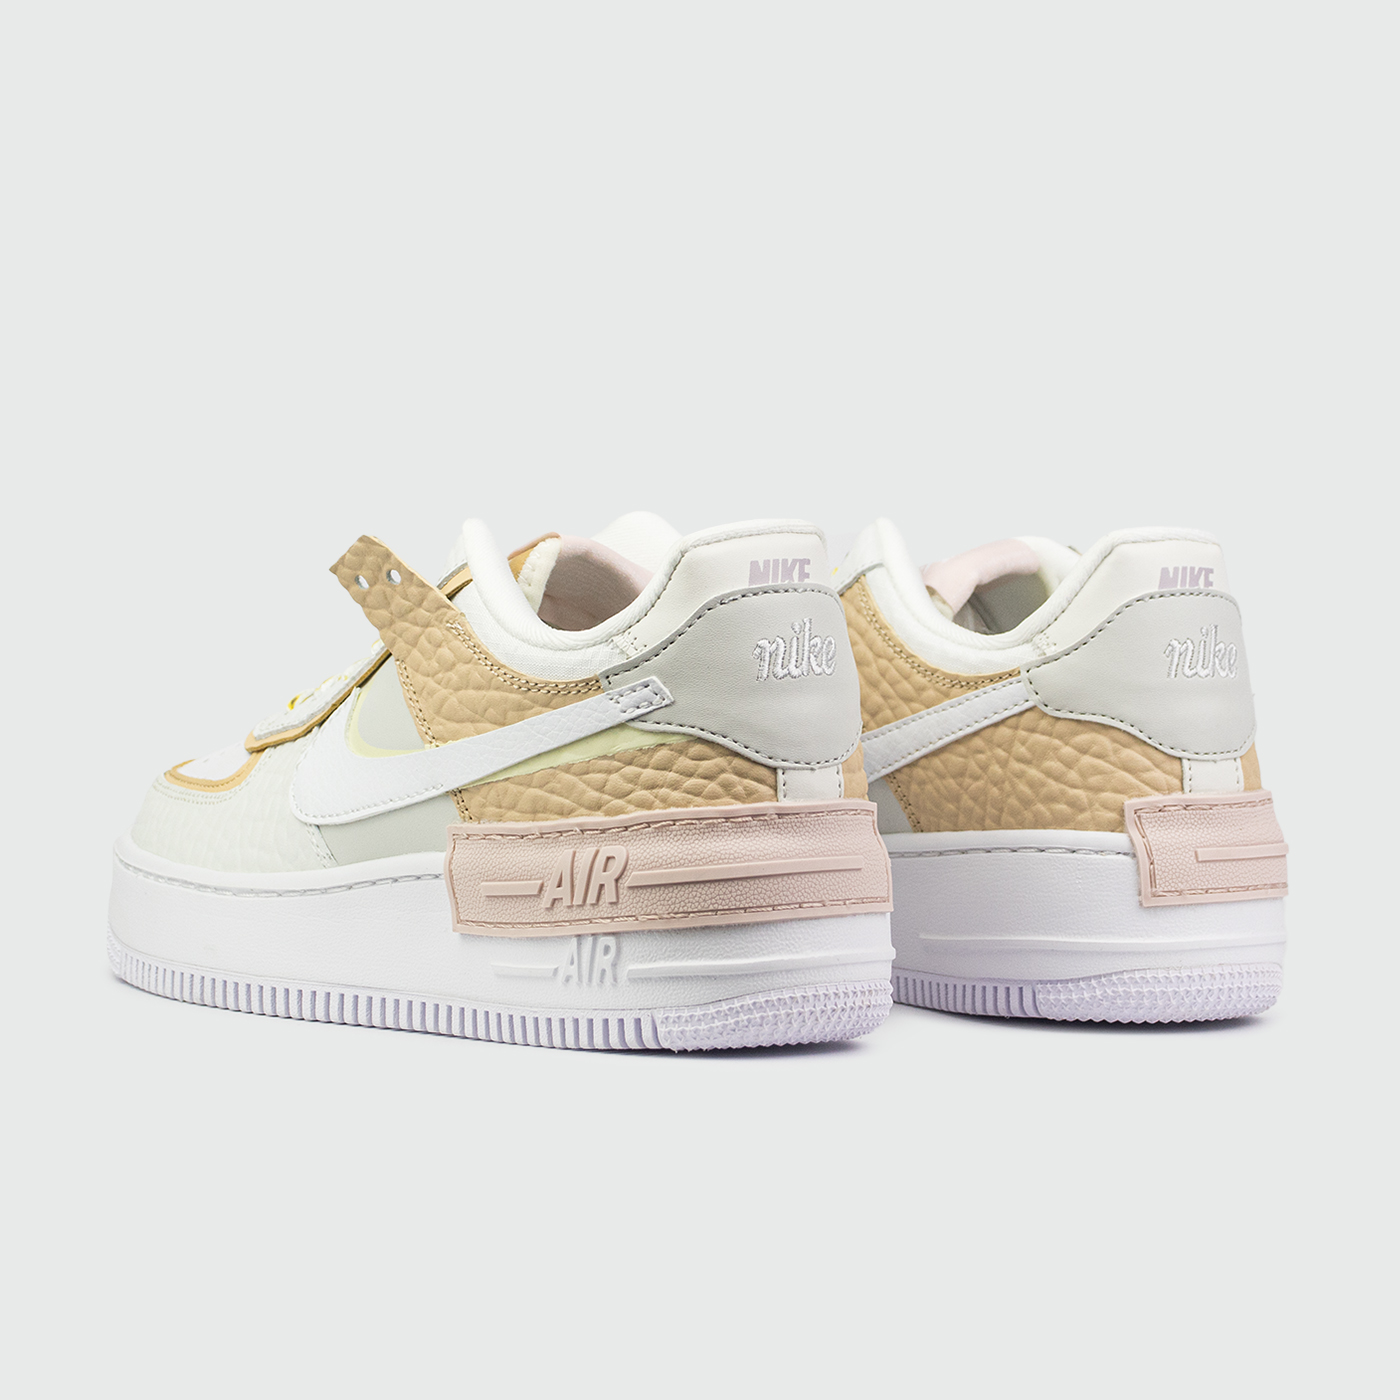 Nike Air Force 1 Low Shadow Wmns Cream new